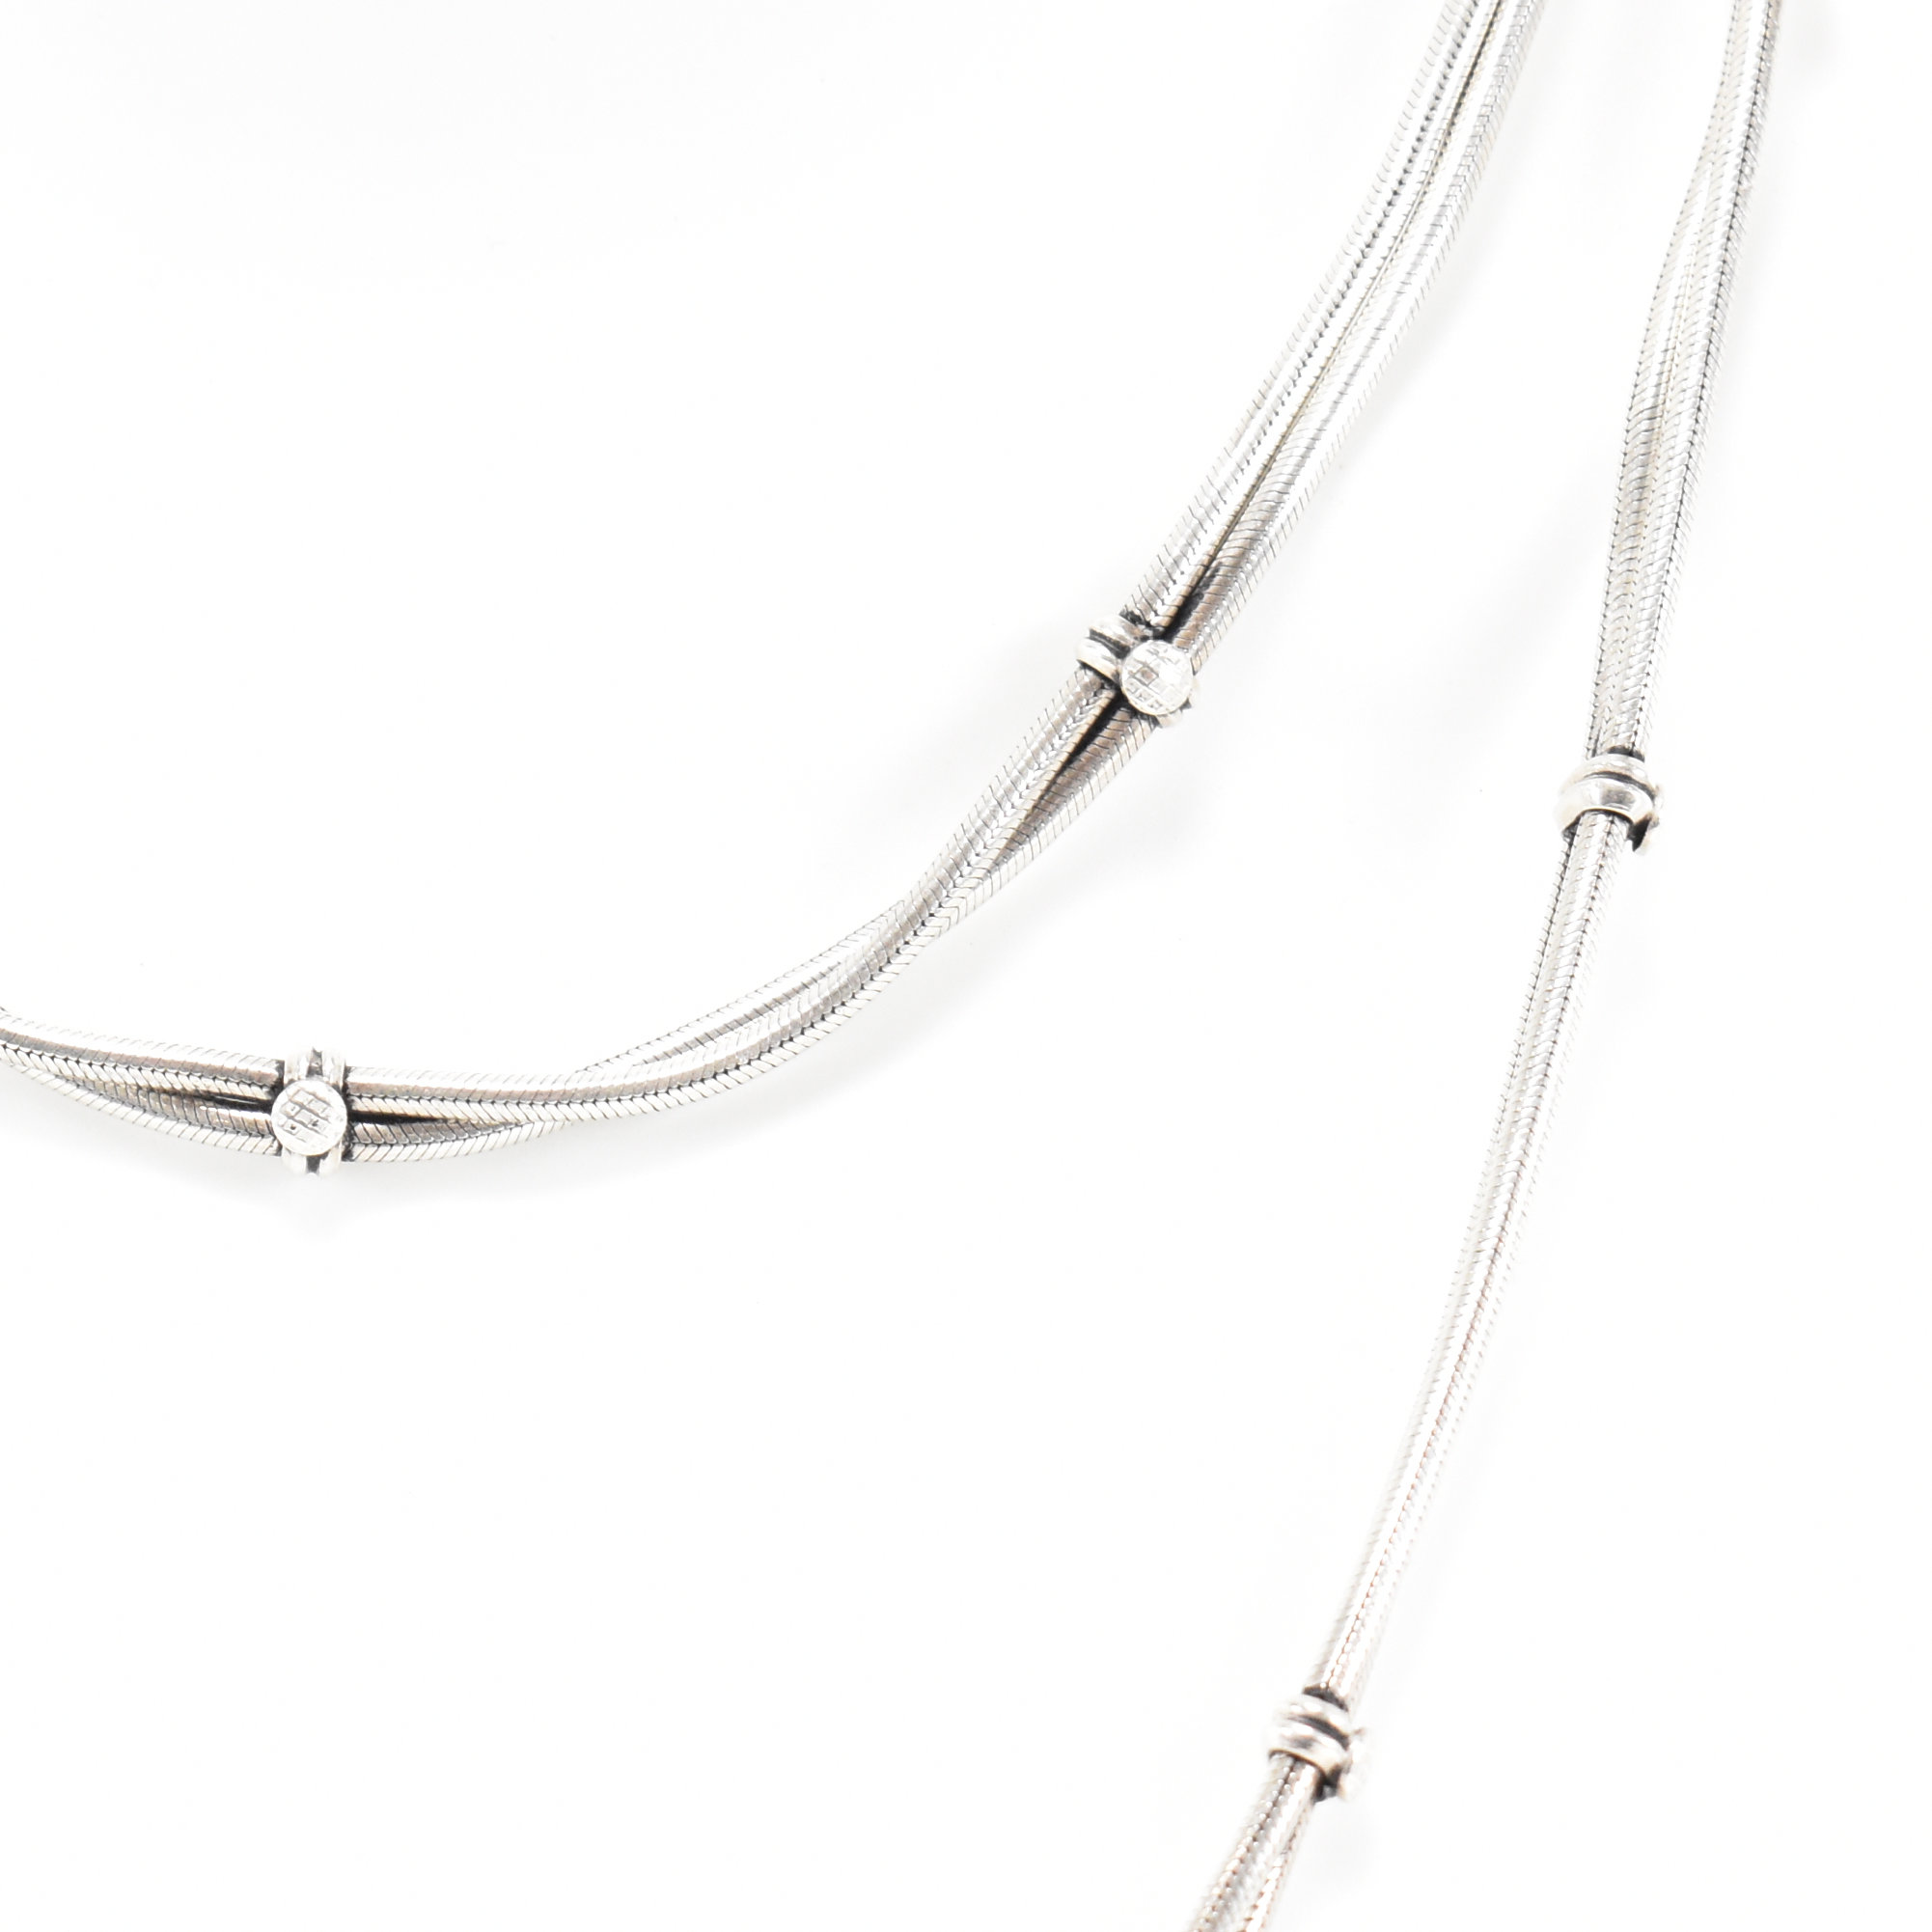 925 SILVER CHAIN NECKLACE - Image 3 of 6